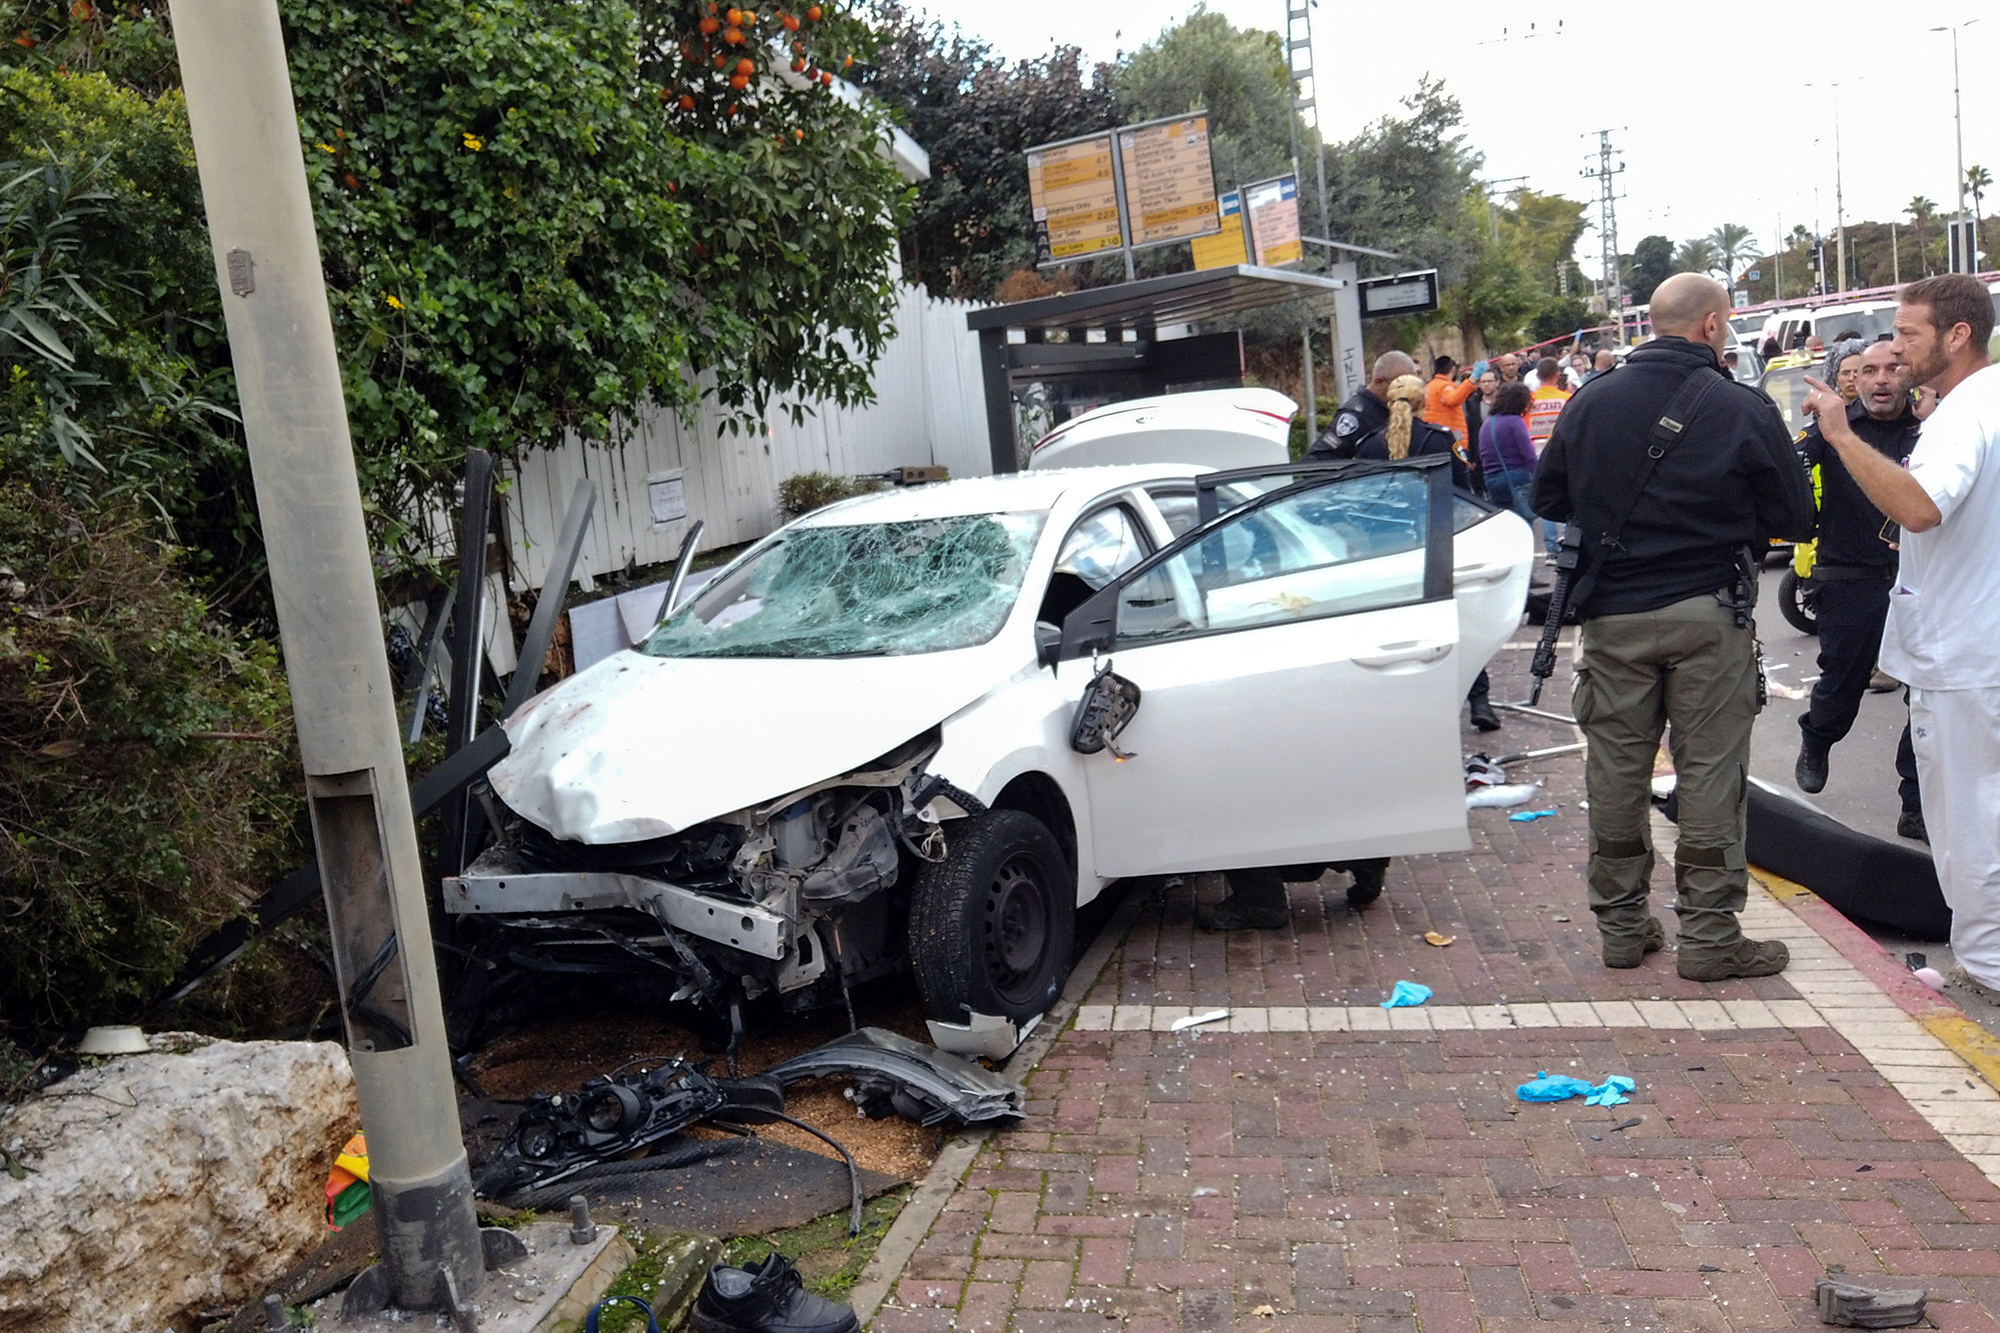 Israeli security officials respond to a suspected ramming attack in Raanana, Israel, on January 15.